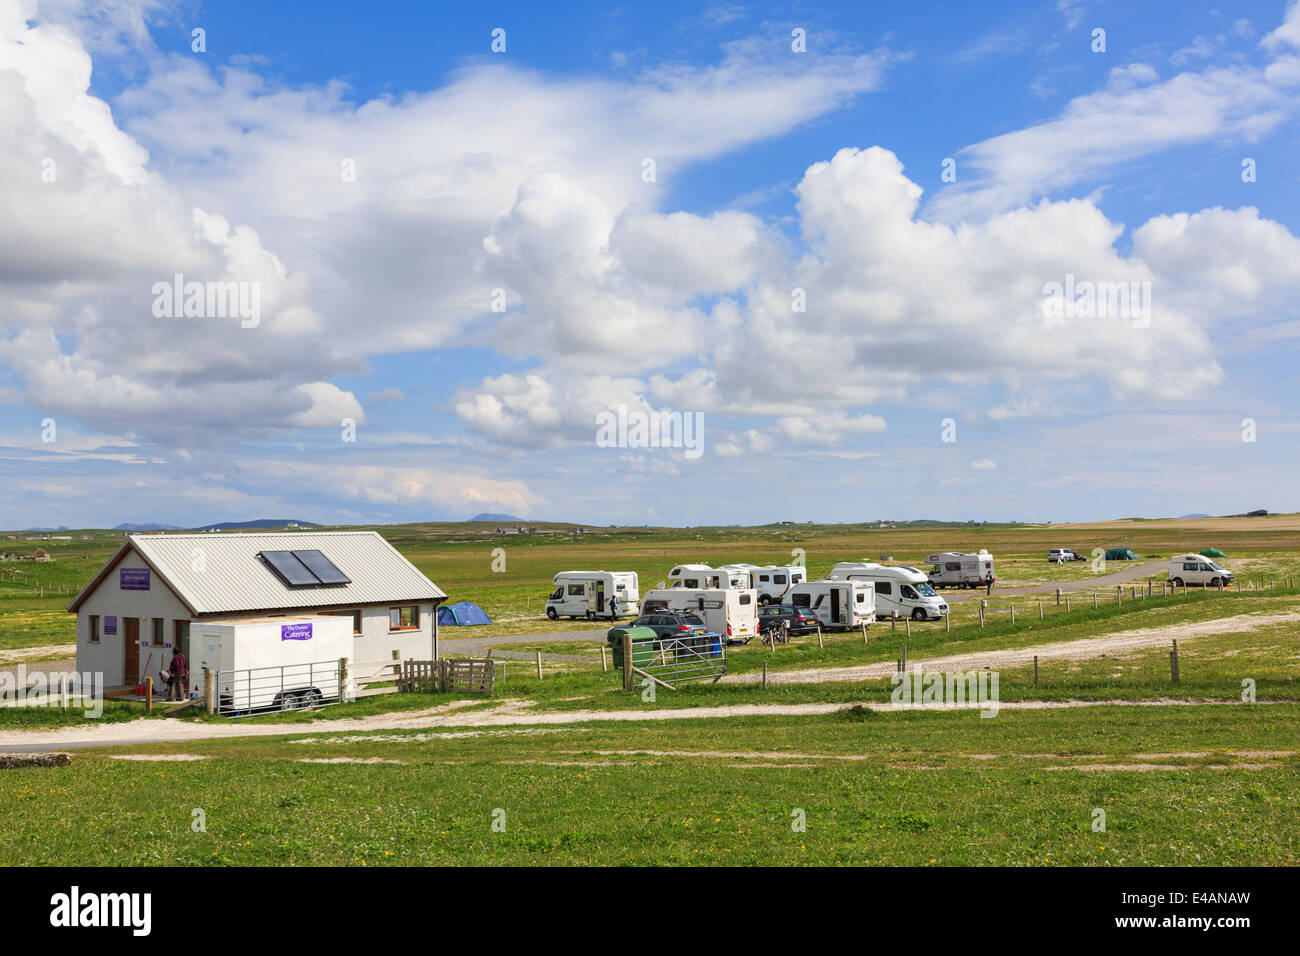 Campsite at Balranald RSPB Nature Reserve, Hougharry, North Uist, Outer Hebrides, Western Isles, Scotland, UK, Britain, Europe. Stock Photo